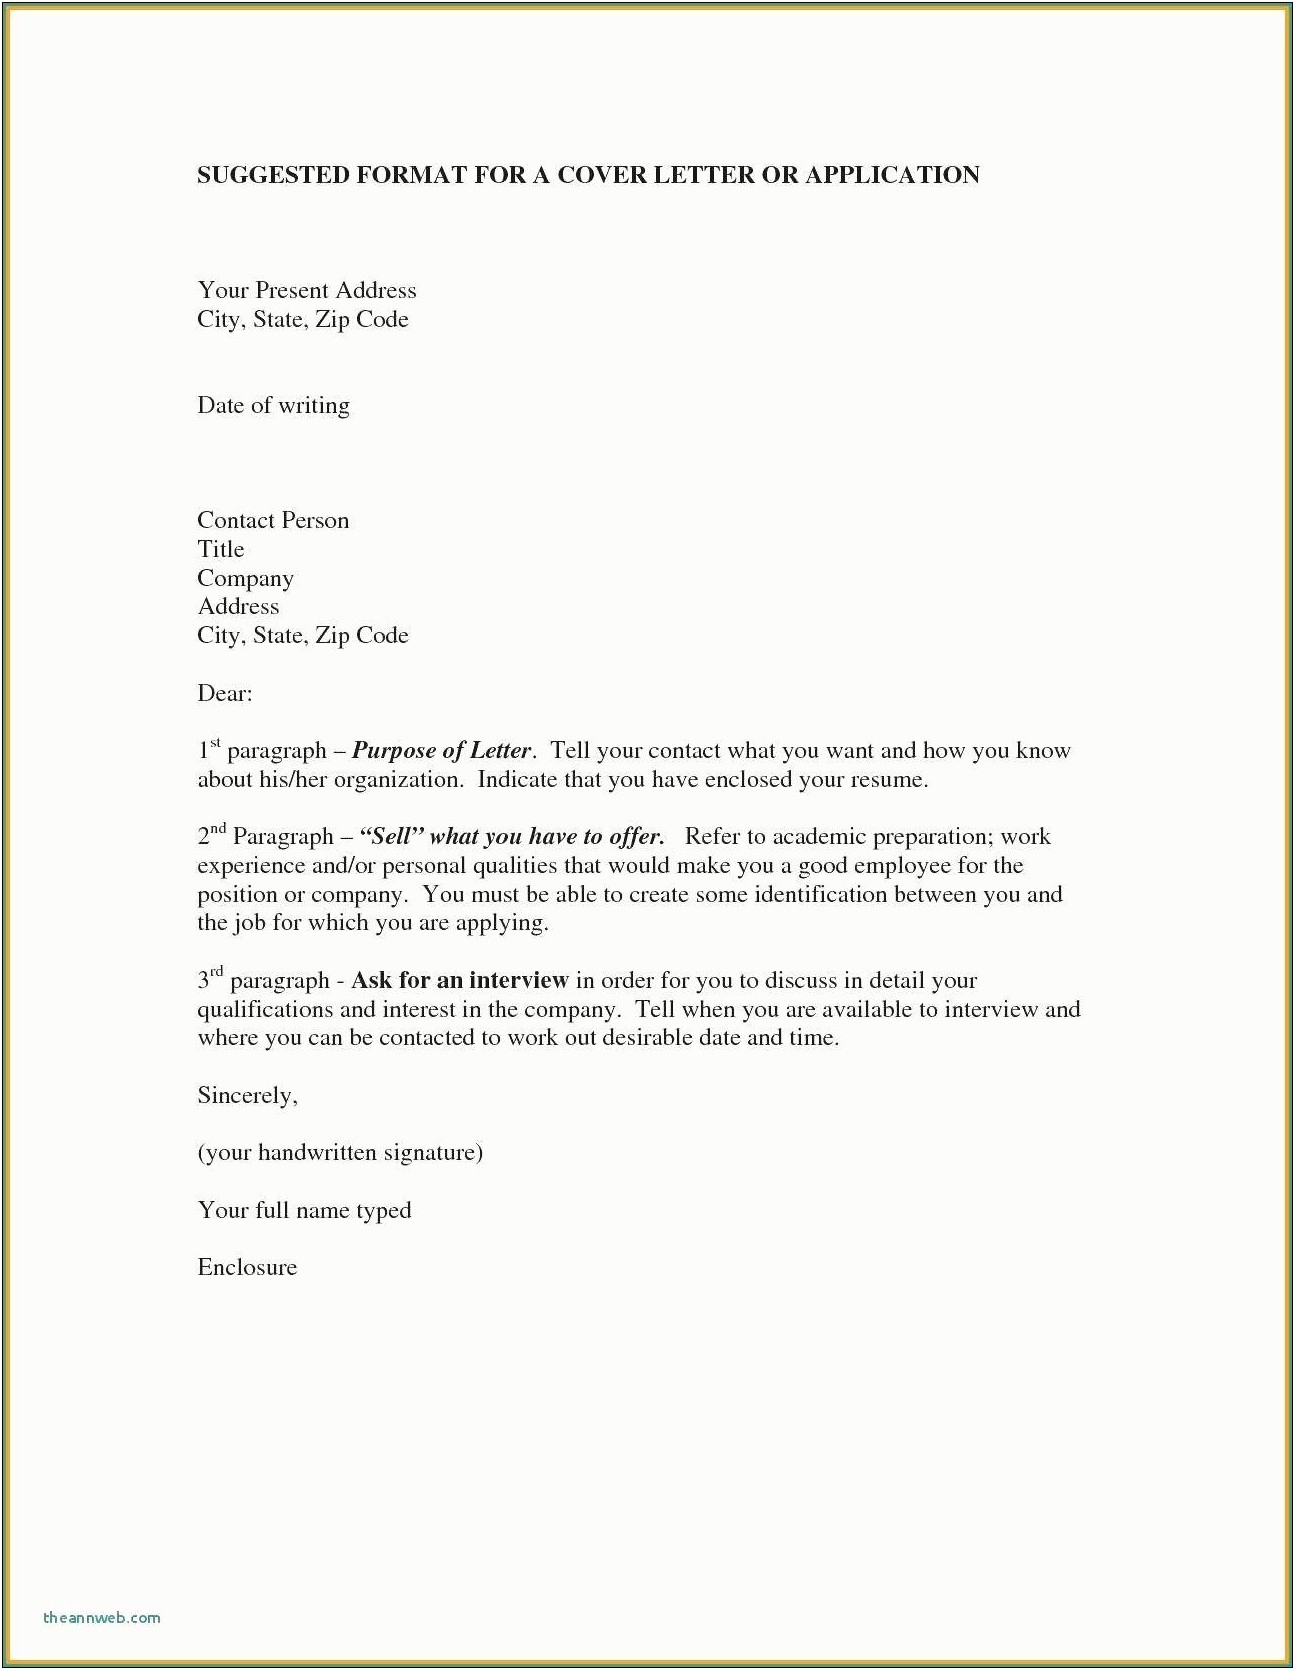 Formal Letter For Job Application With Resume